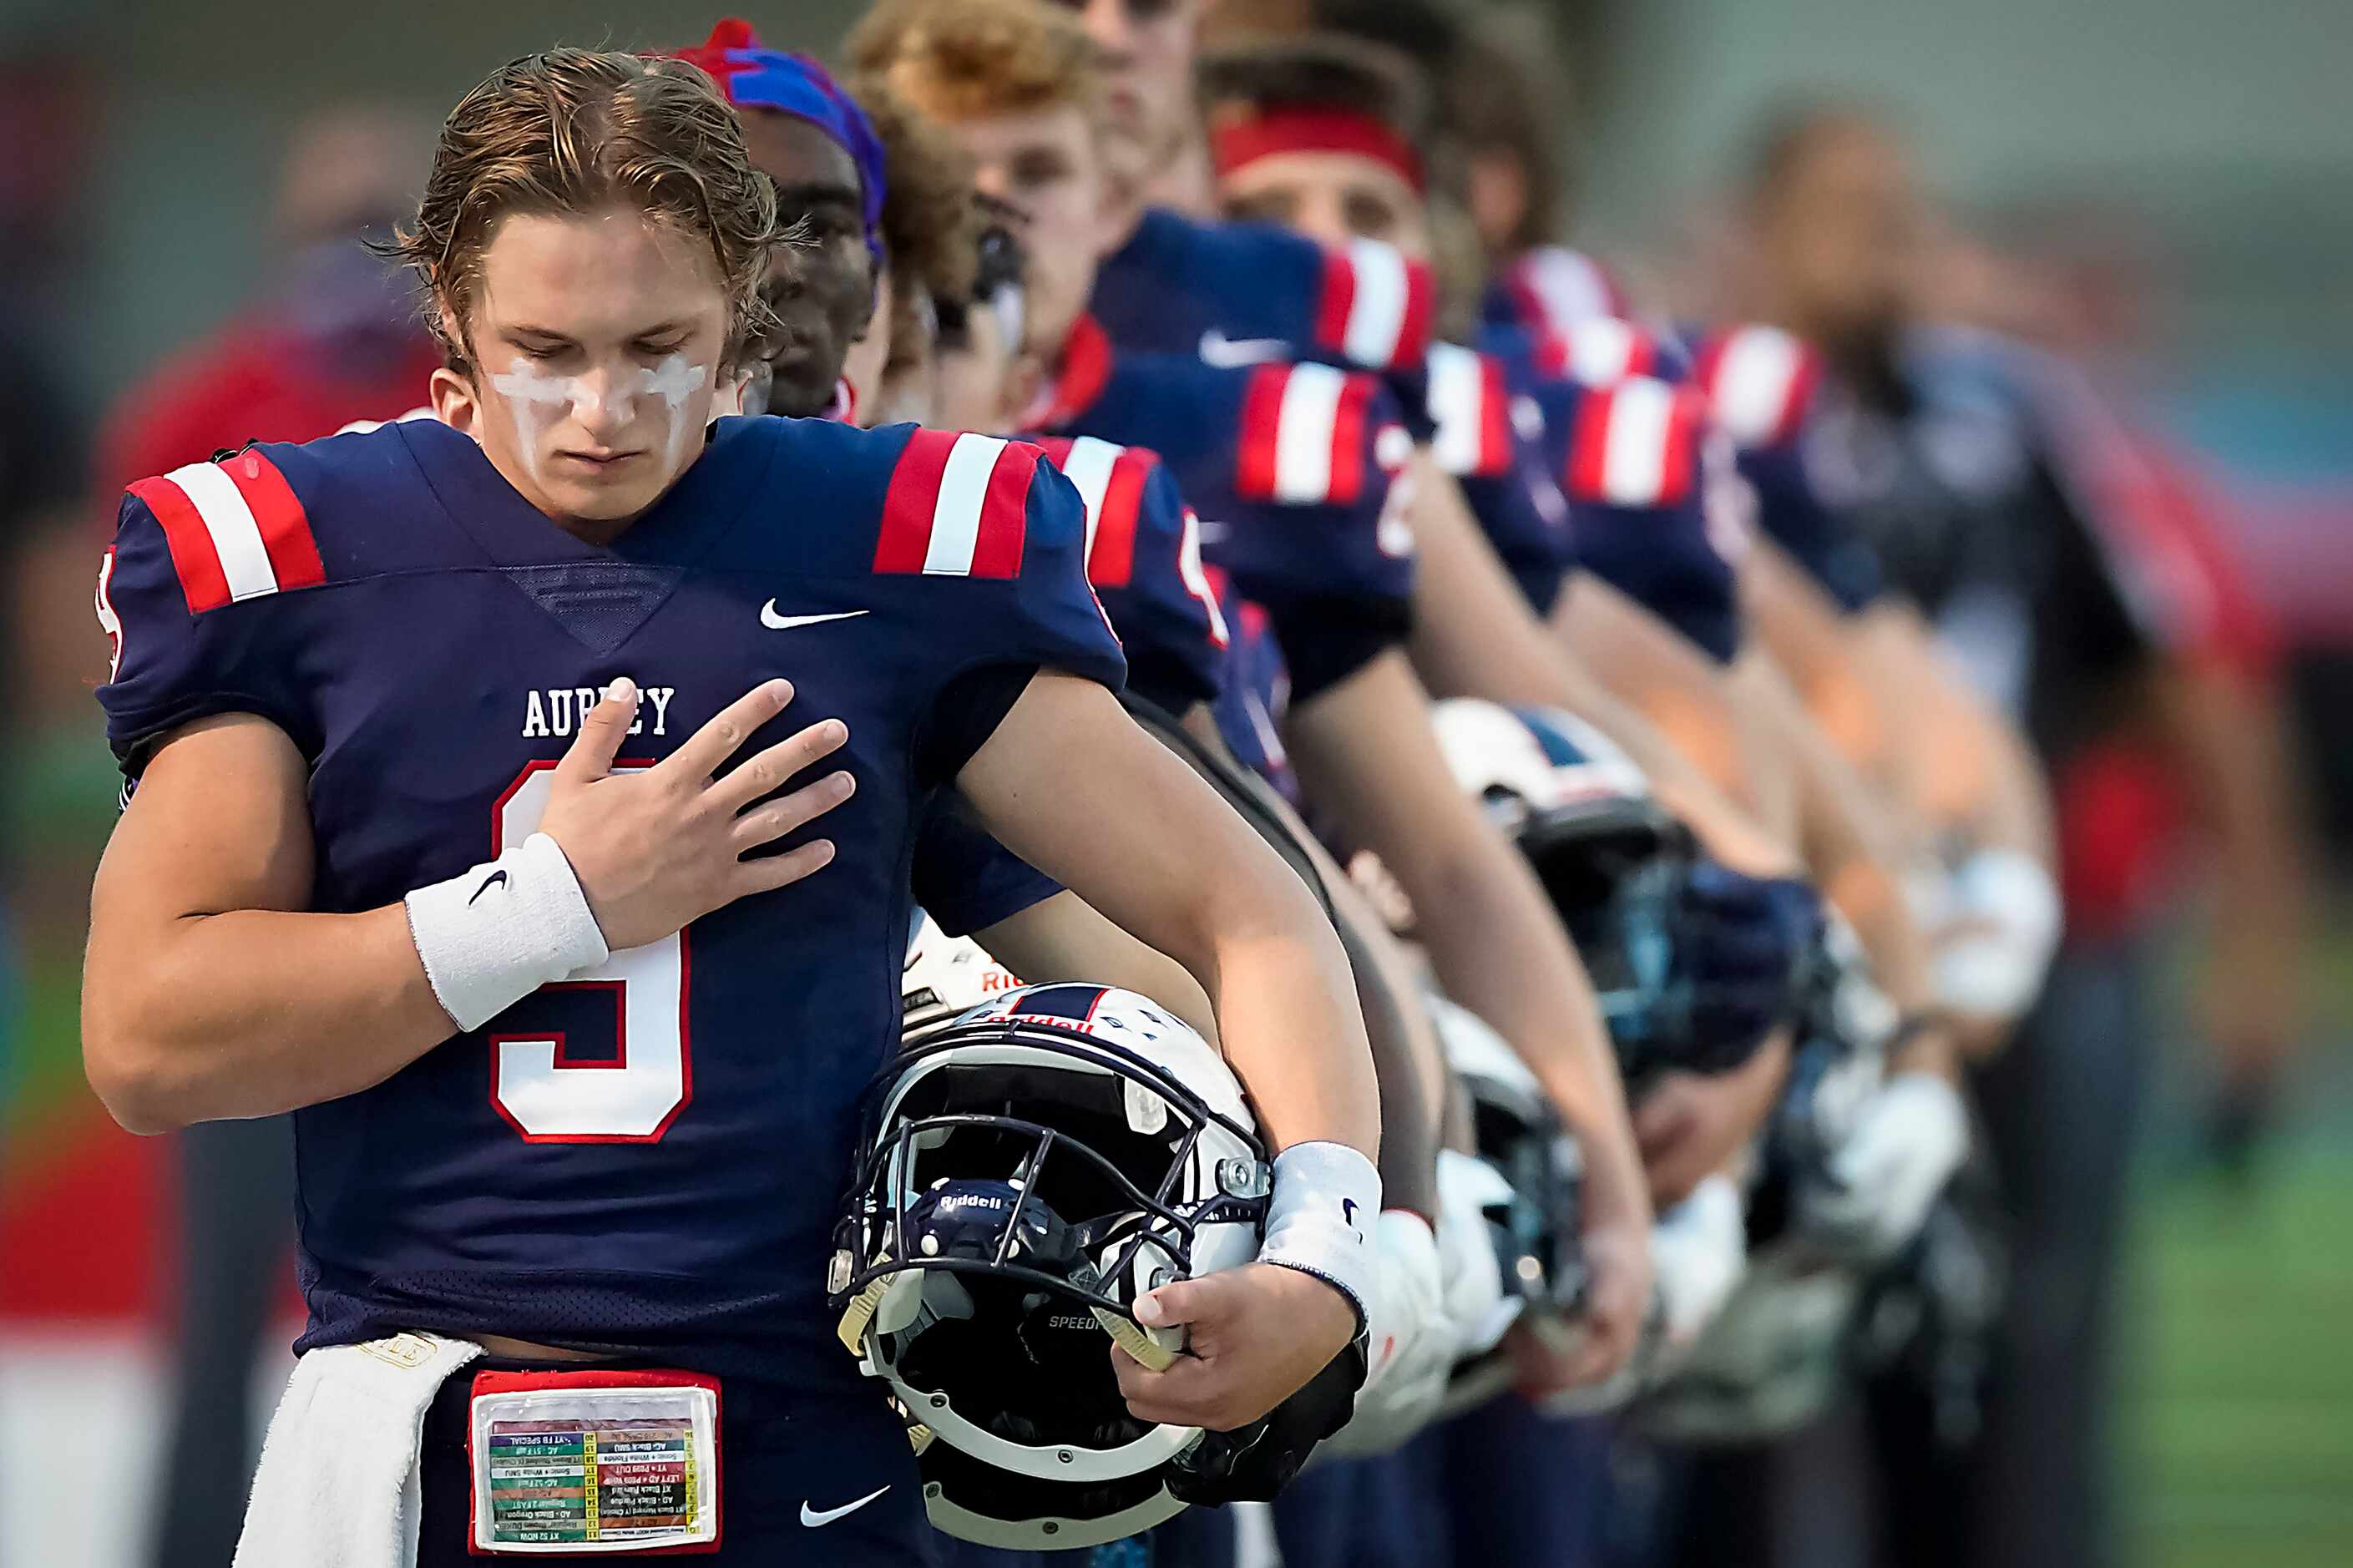 Aubrey quarterback Jaxon Holder stands for the national anthem with teammates before facing...